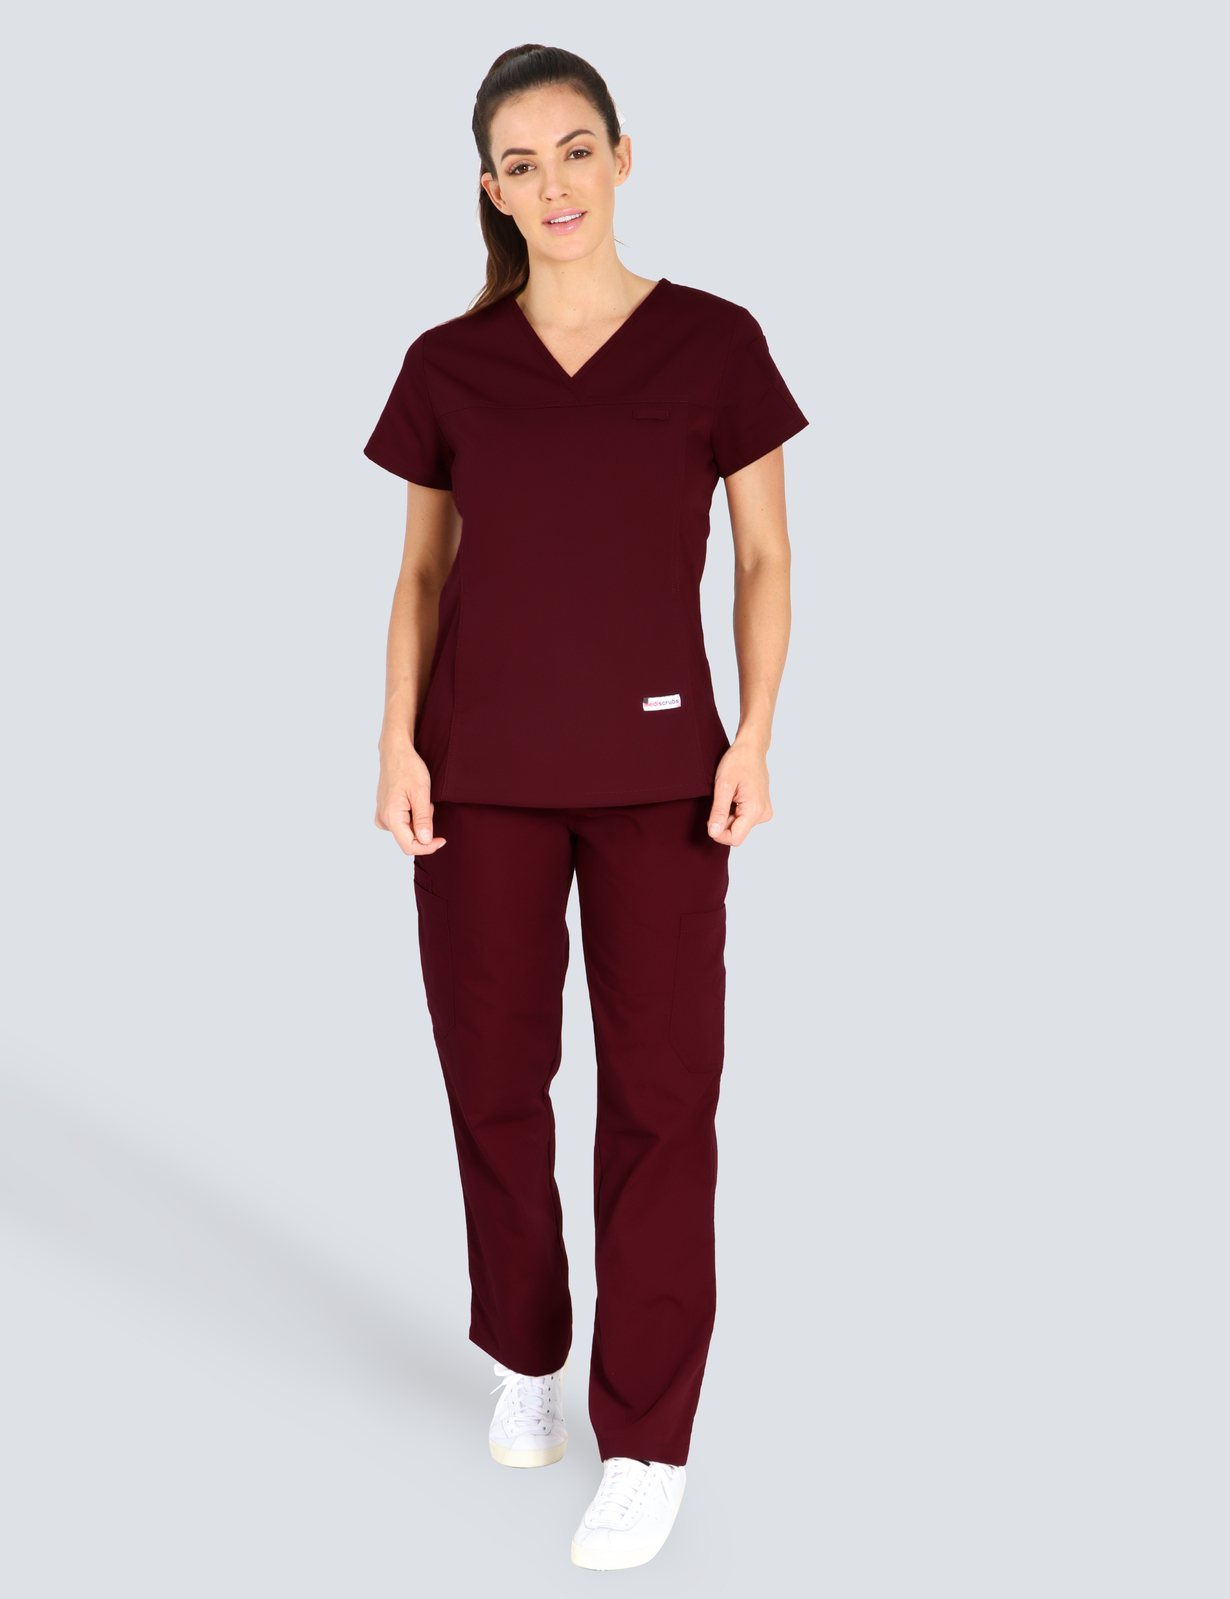 Redcliffe Hospital - ED AIN (Women's Fit Solid Scrub Top and Cargo Pants in Burgundy incl Logos)